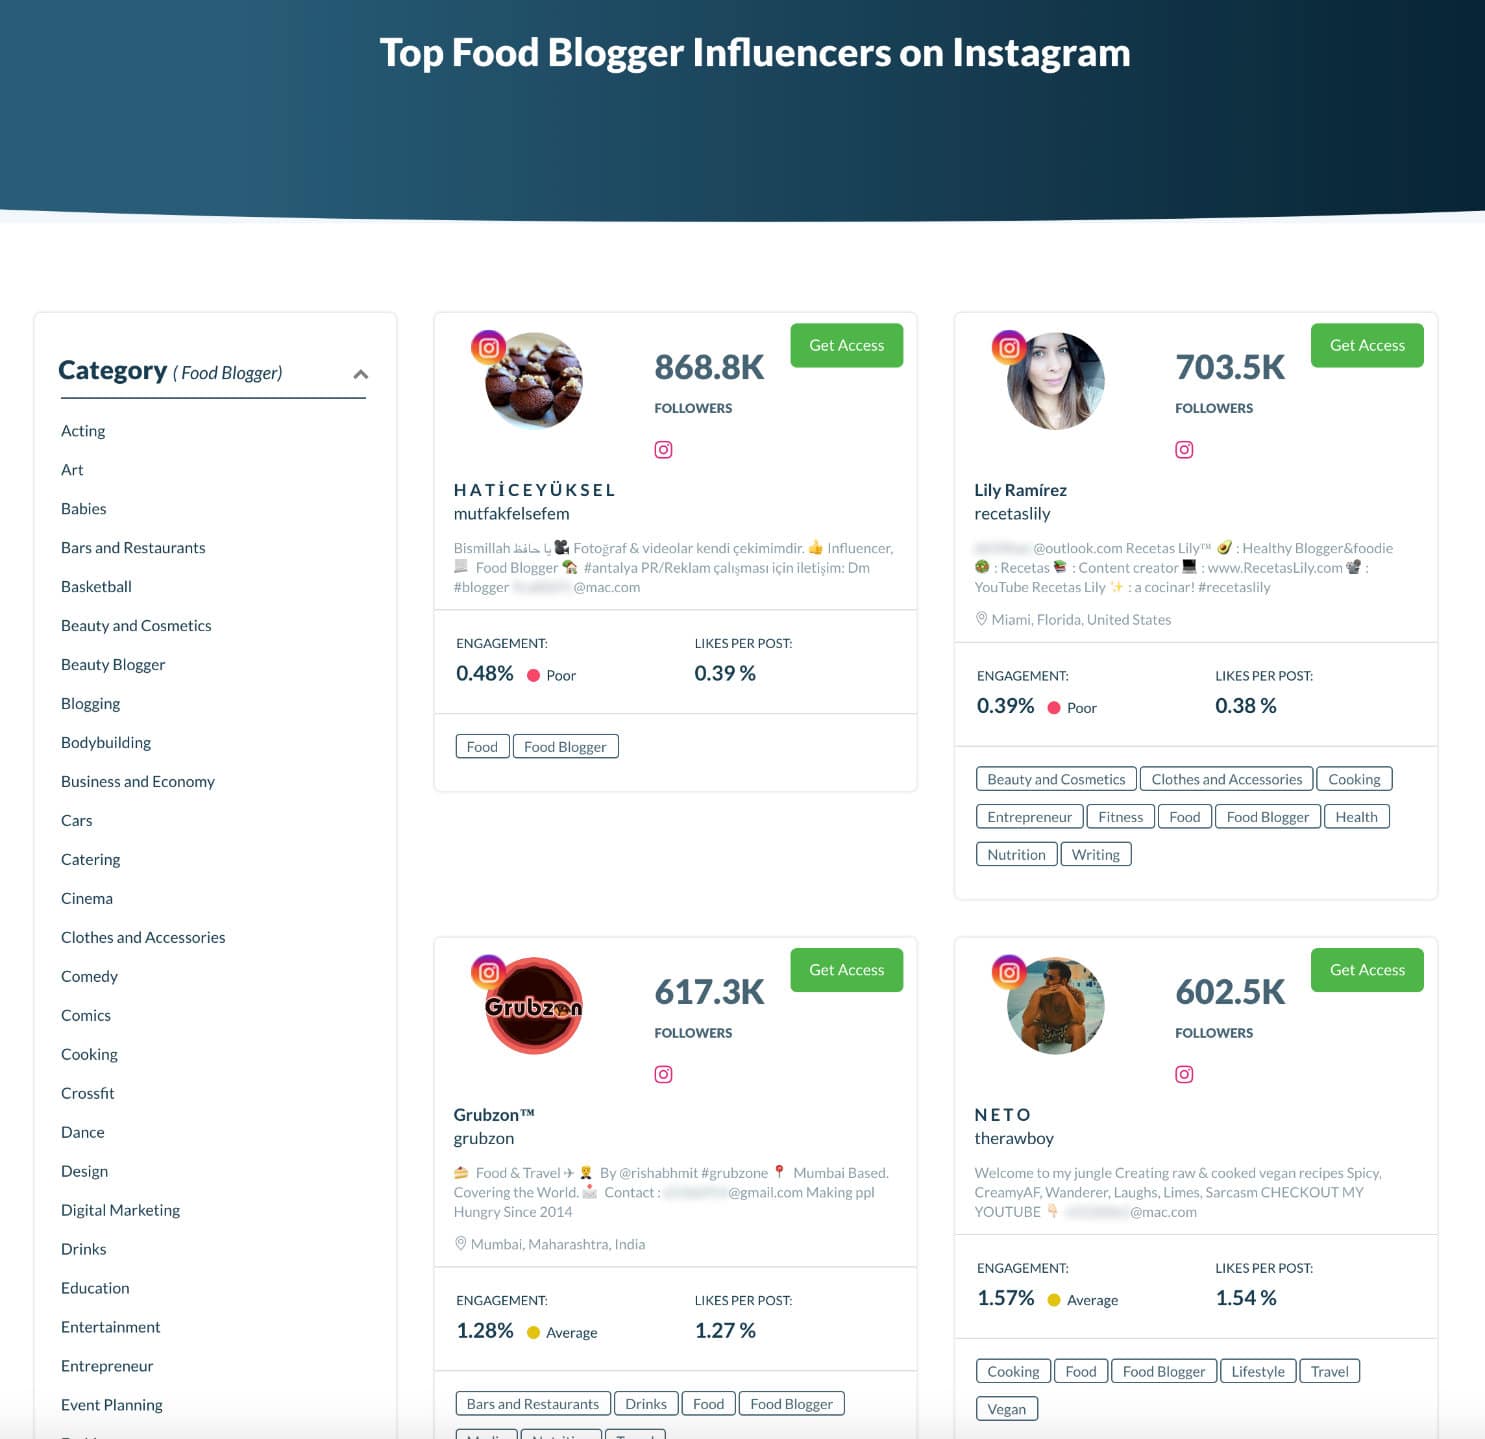 Top food bloggers - influencers on Instagram